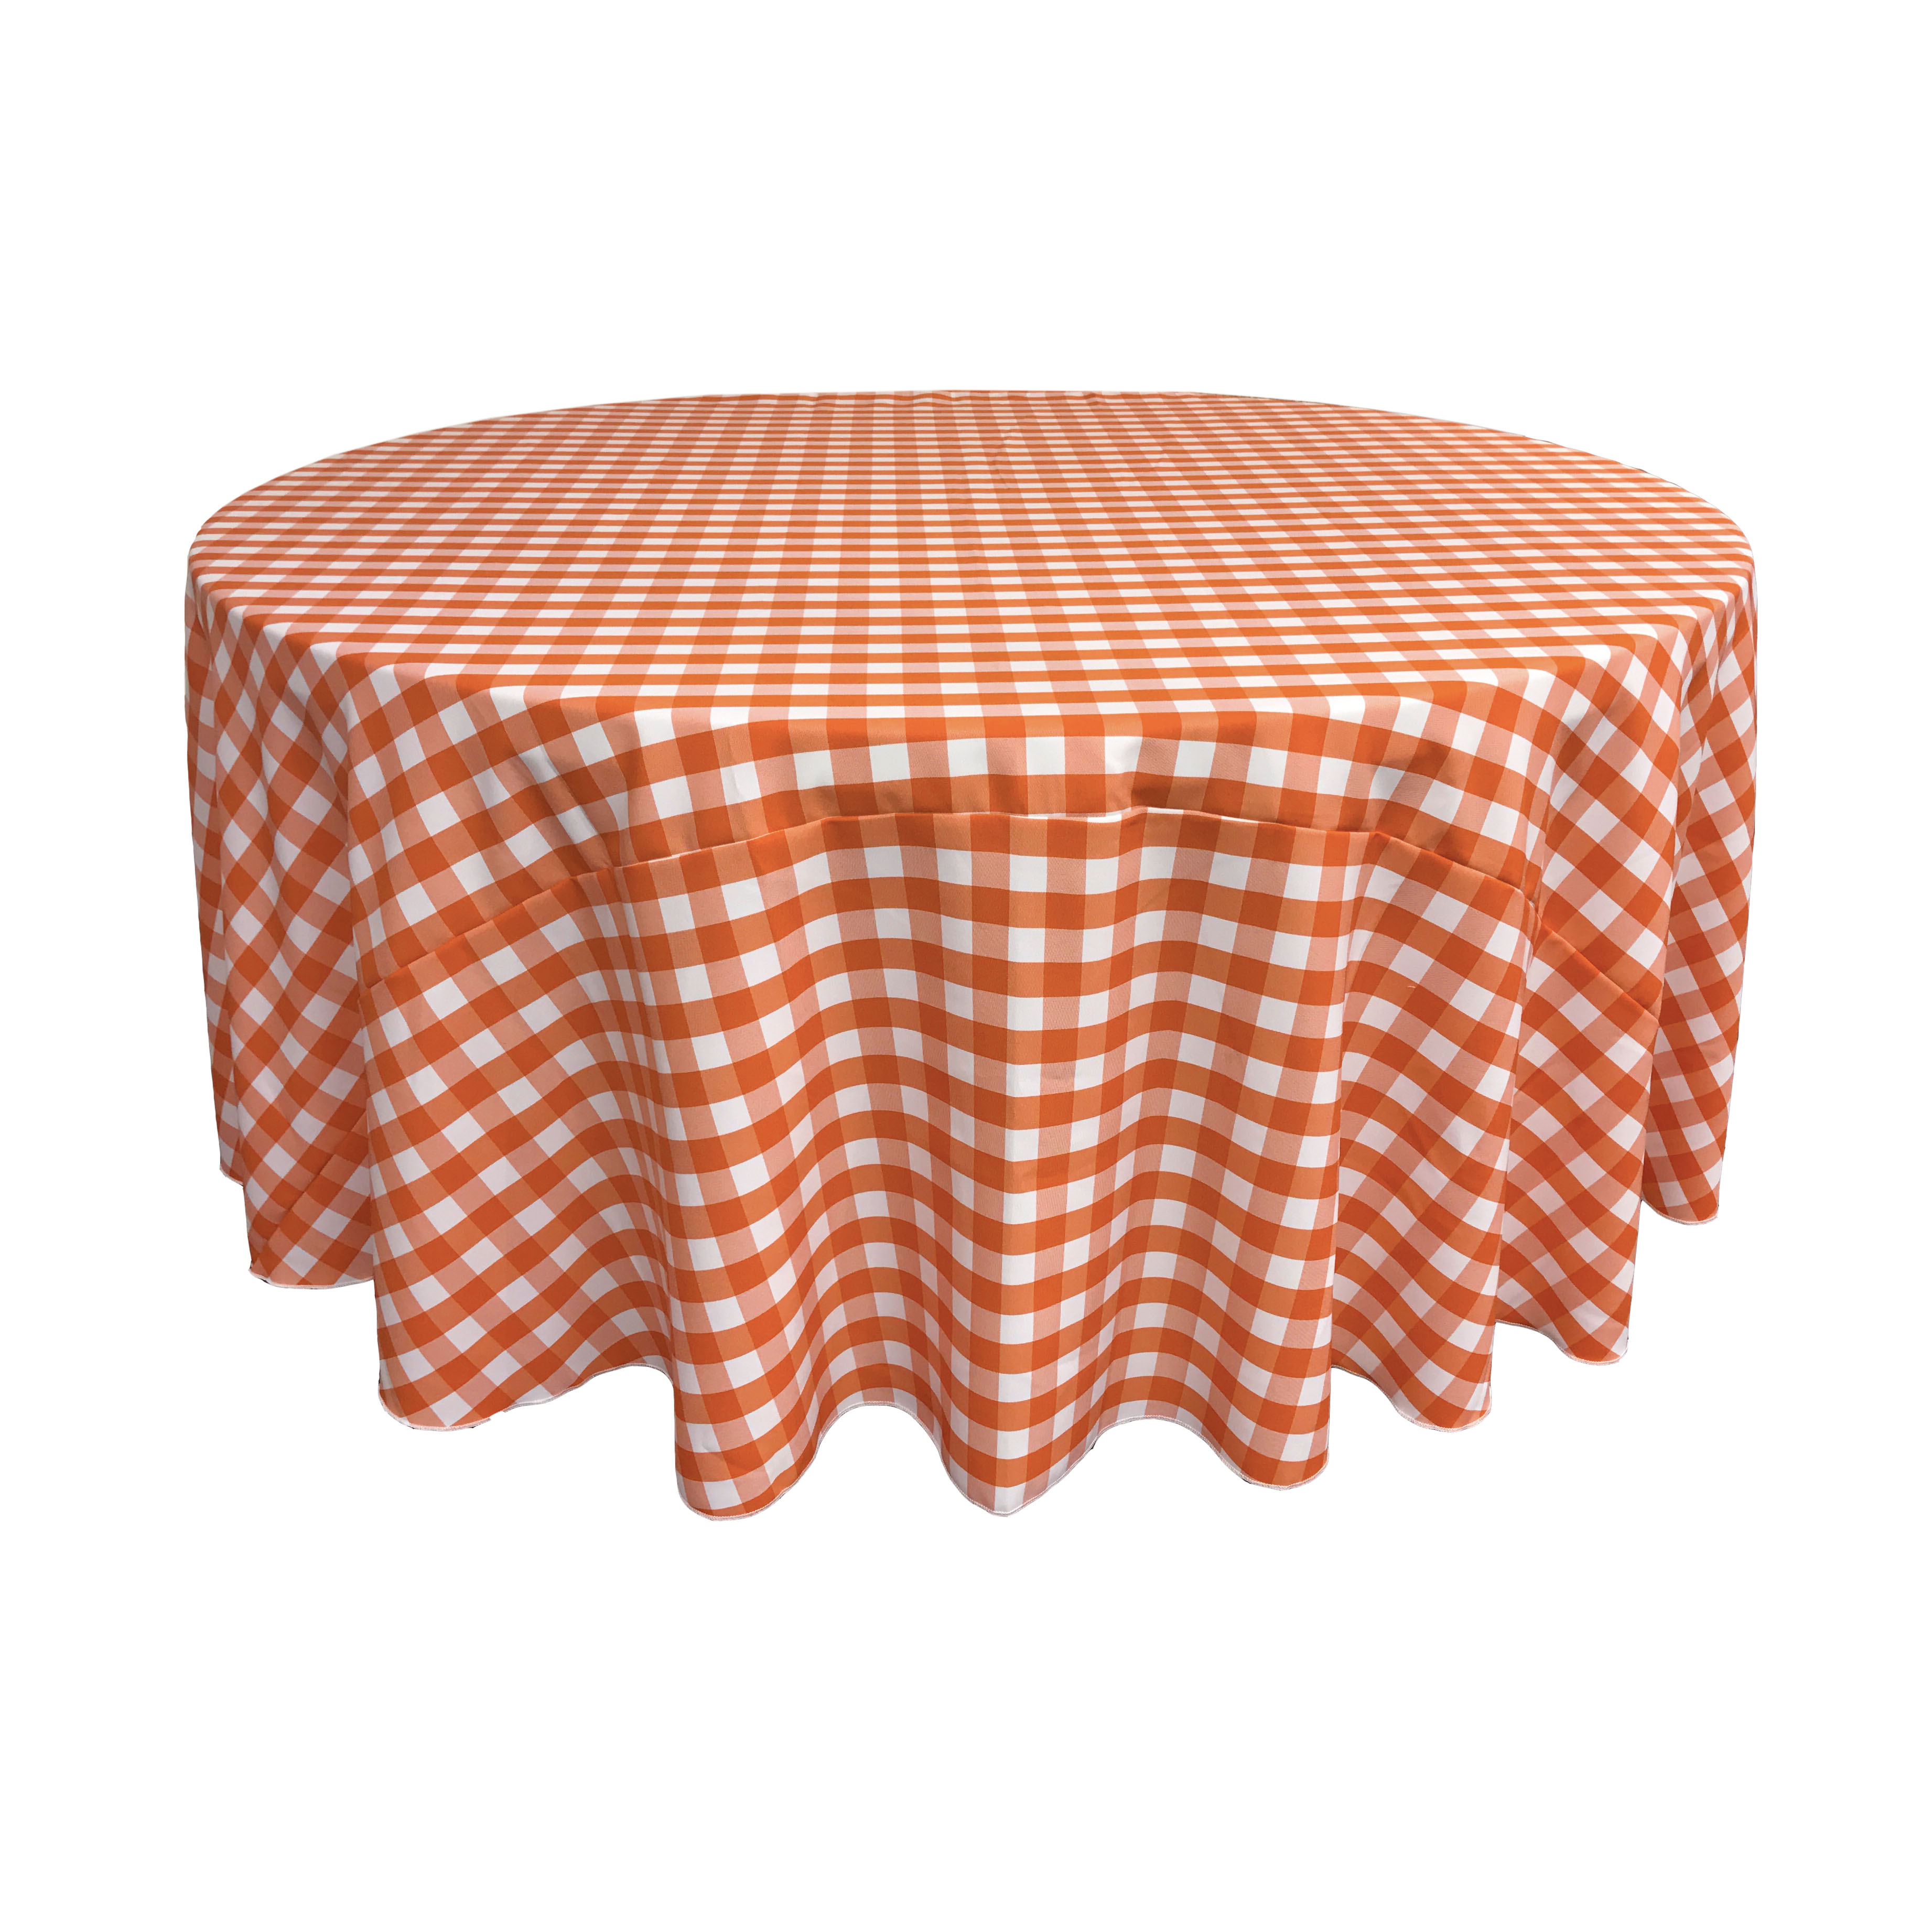 LA Linen Polyester Gingham Checkered 108" Round Tablecloth, White and Orange